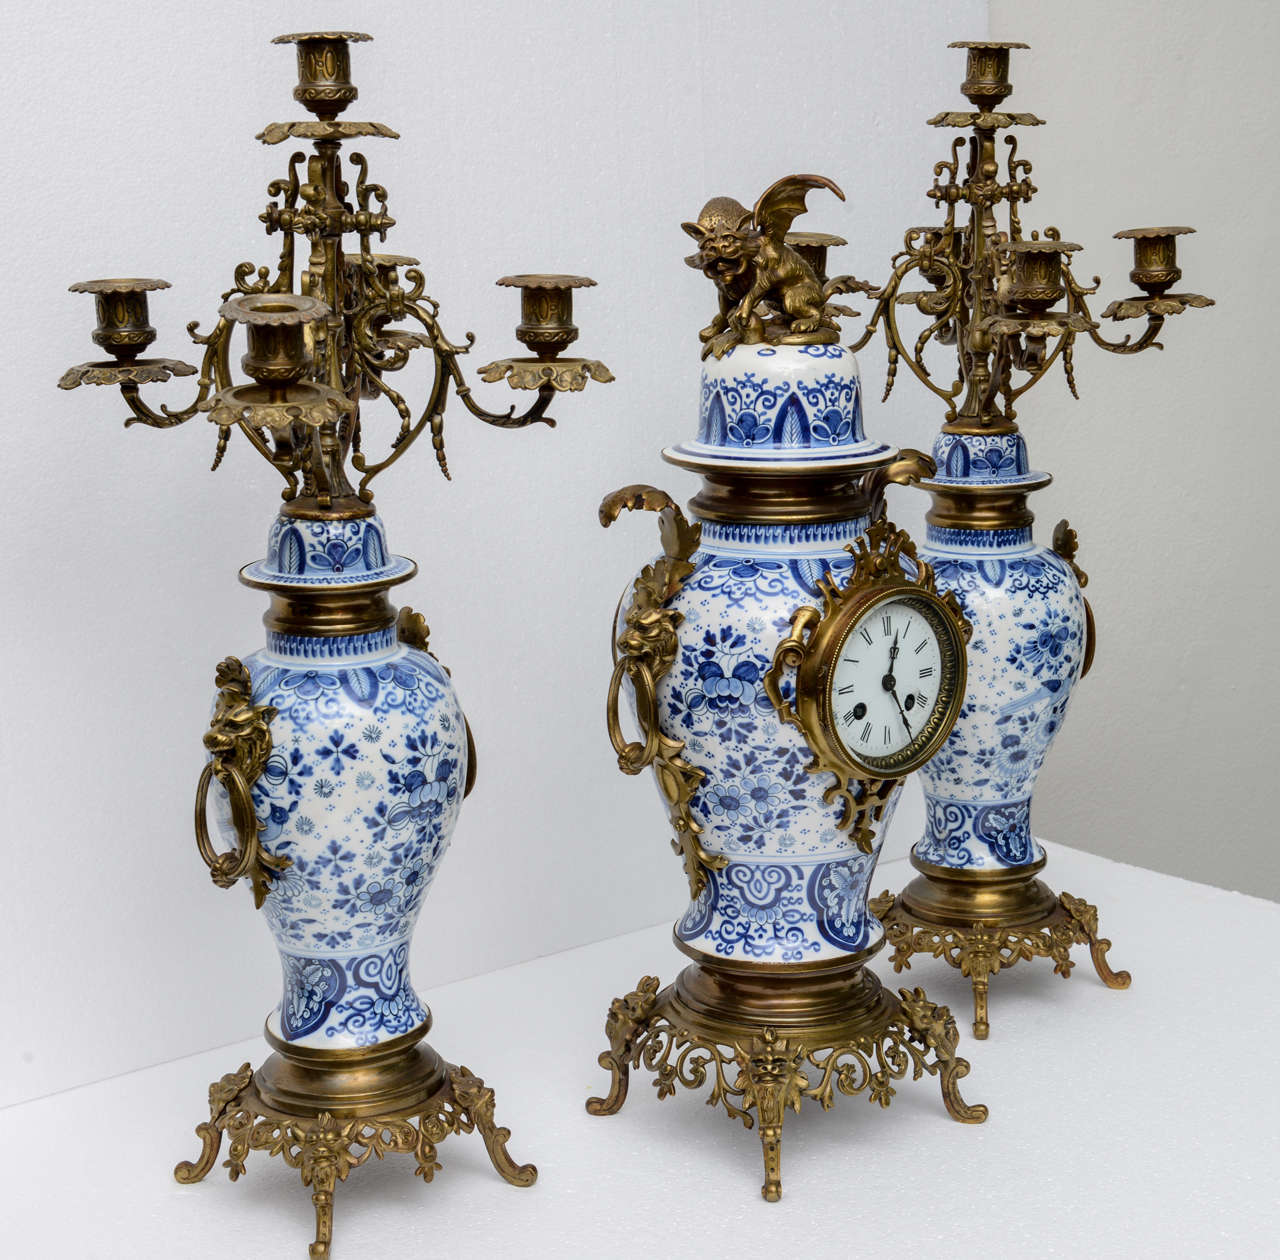 Delft garniture with bronze mounts; garniture consists of three pieces, a clock ( 21.5h) and a pair of candelabras (24.5h) enameled dial signed, 